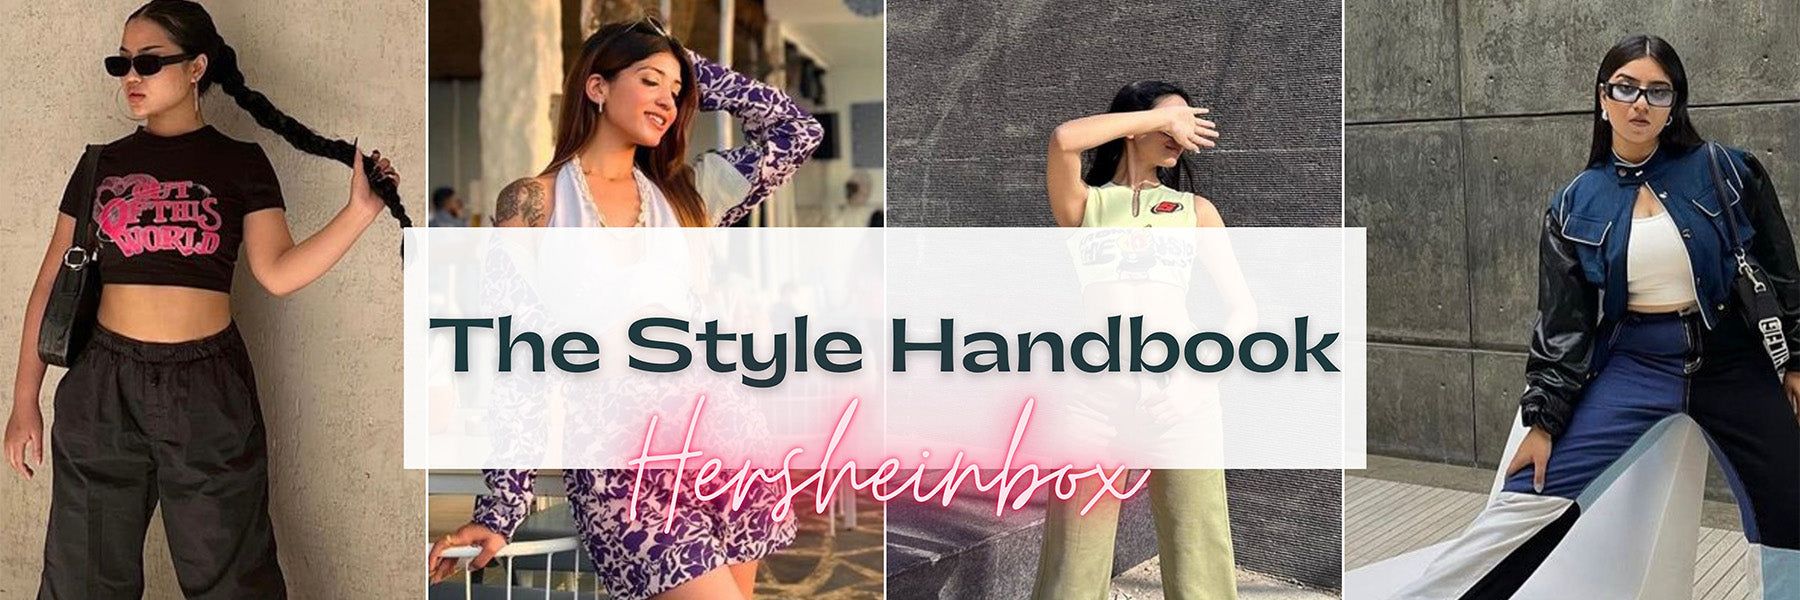 The style handbook: Fashion tips to elevate your look with Hersheinbox